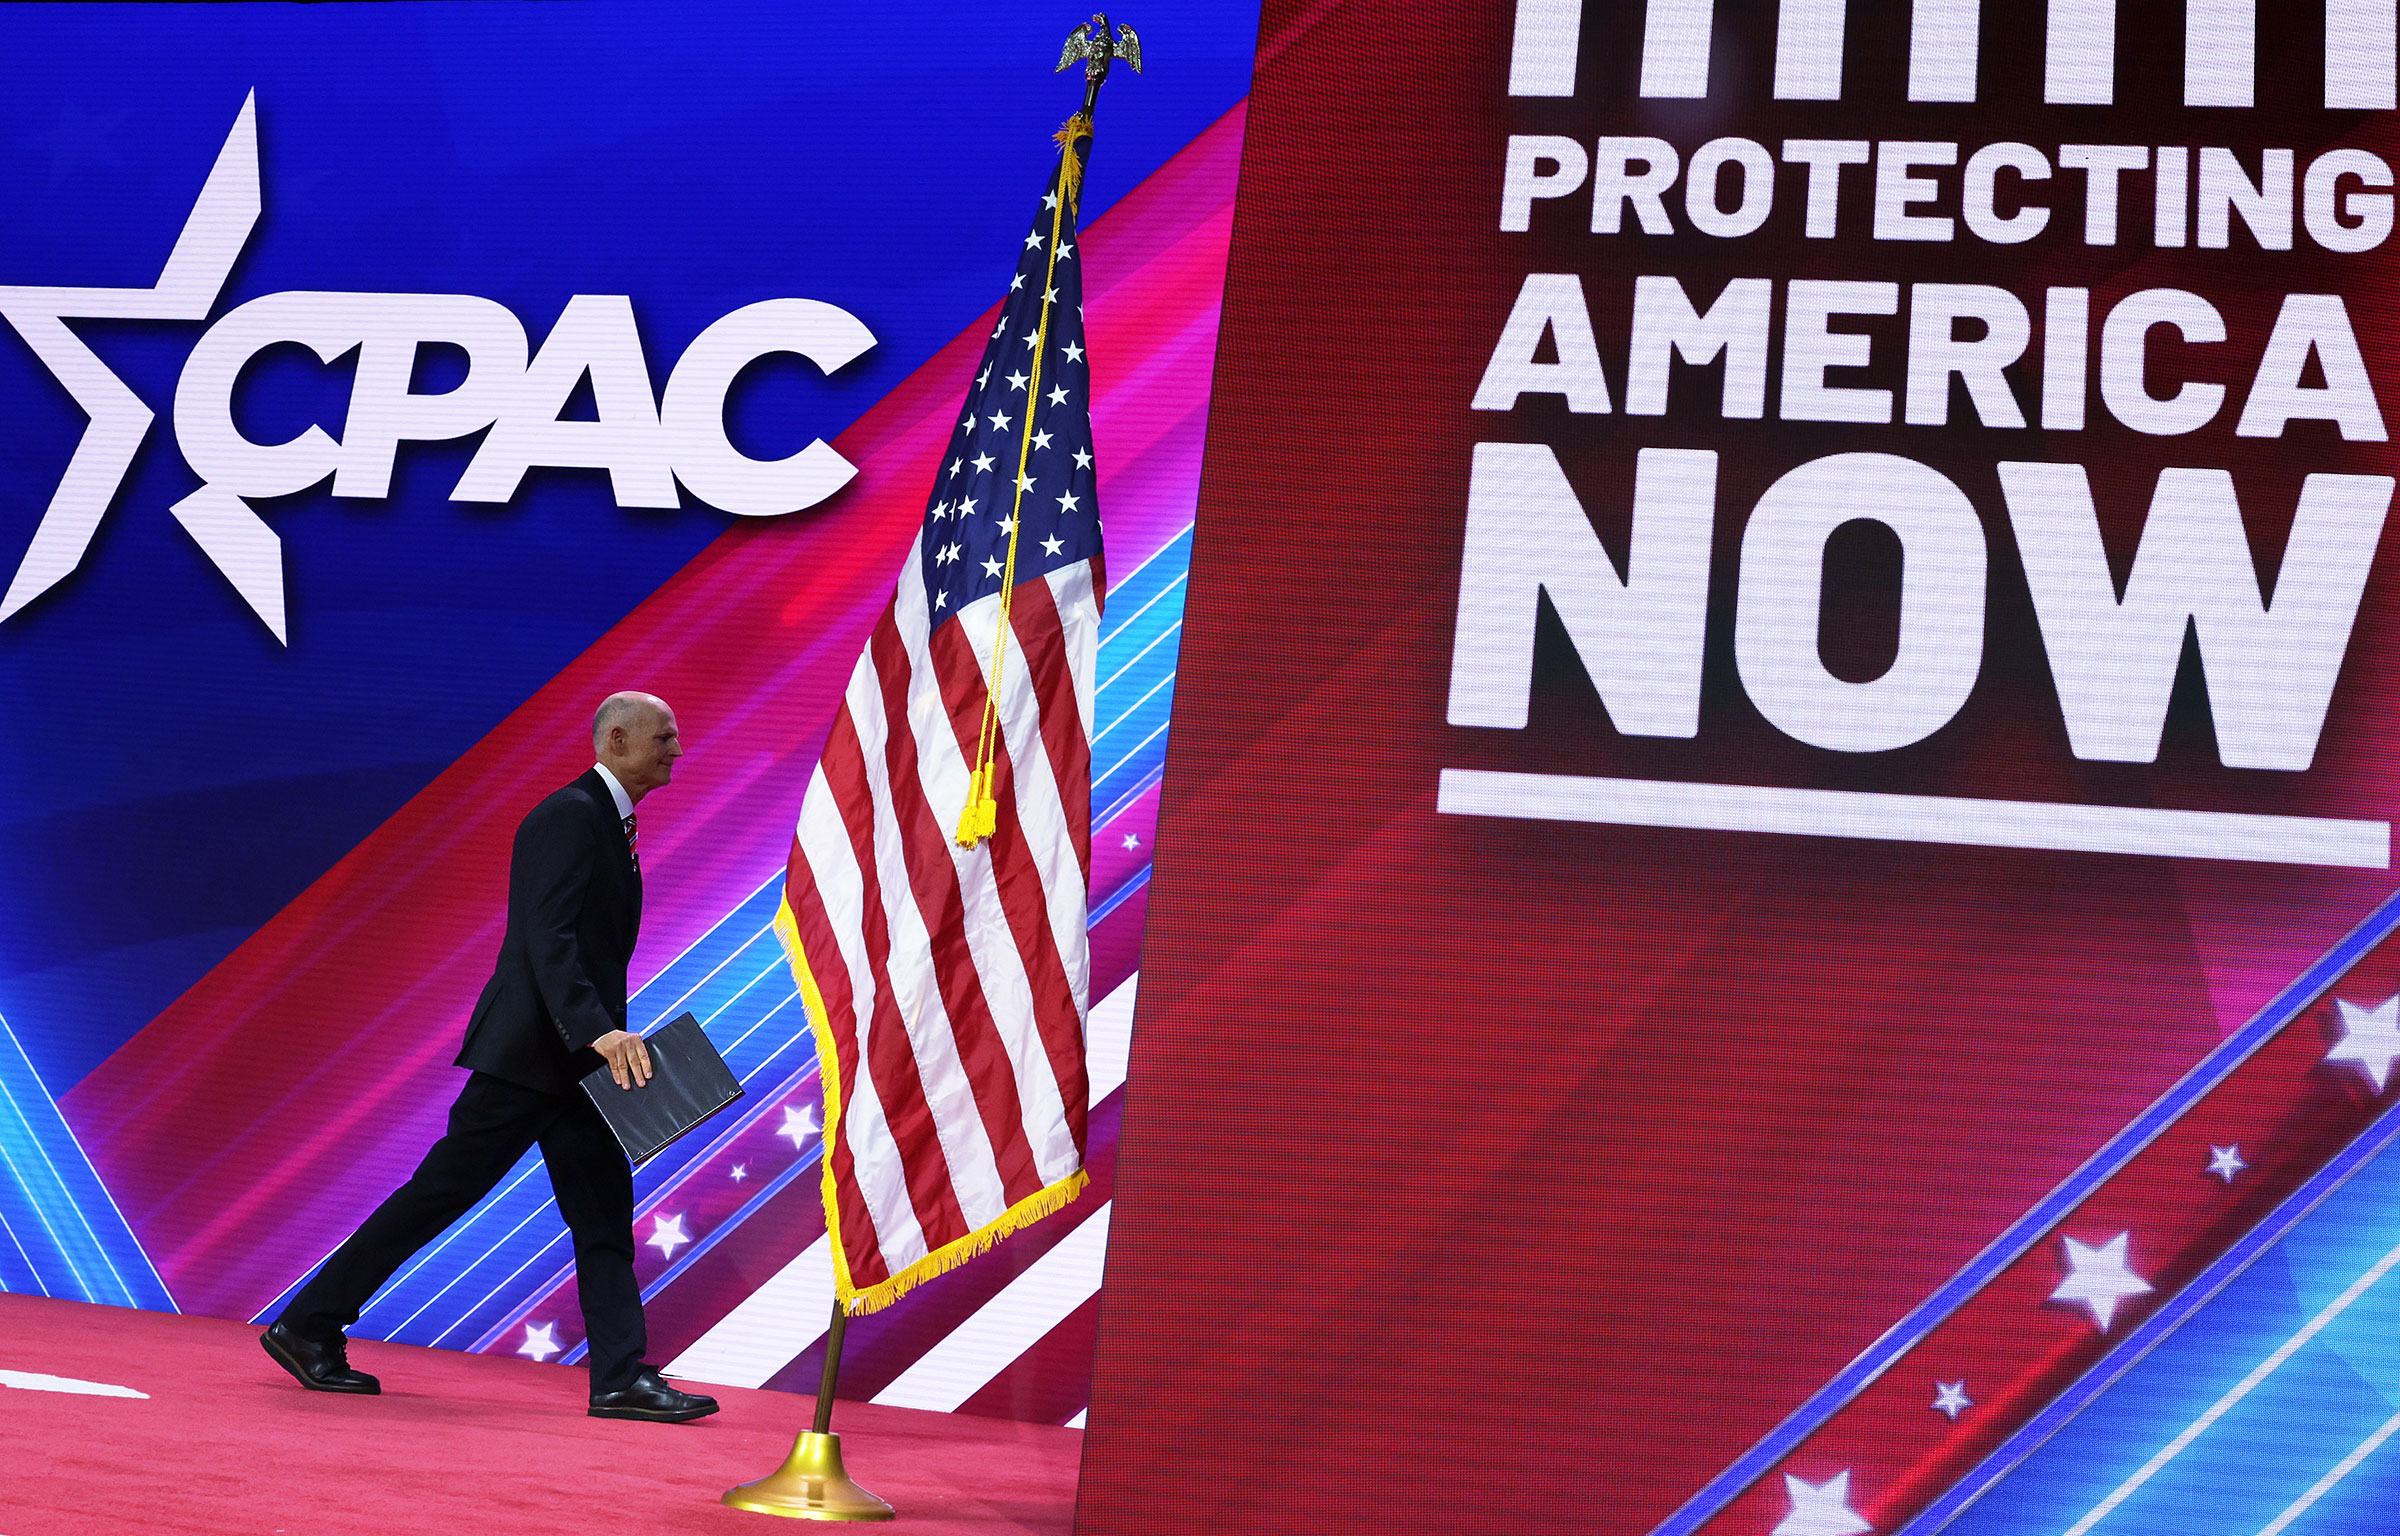 Scott leaves the stage after speaking during CPAC in National Harbor, Md. on March 2, 2023. (Alex Wong—Getty Images)